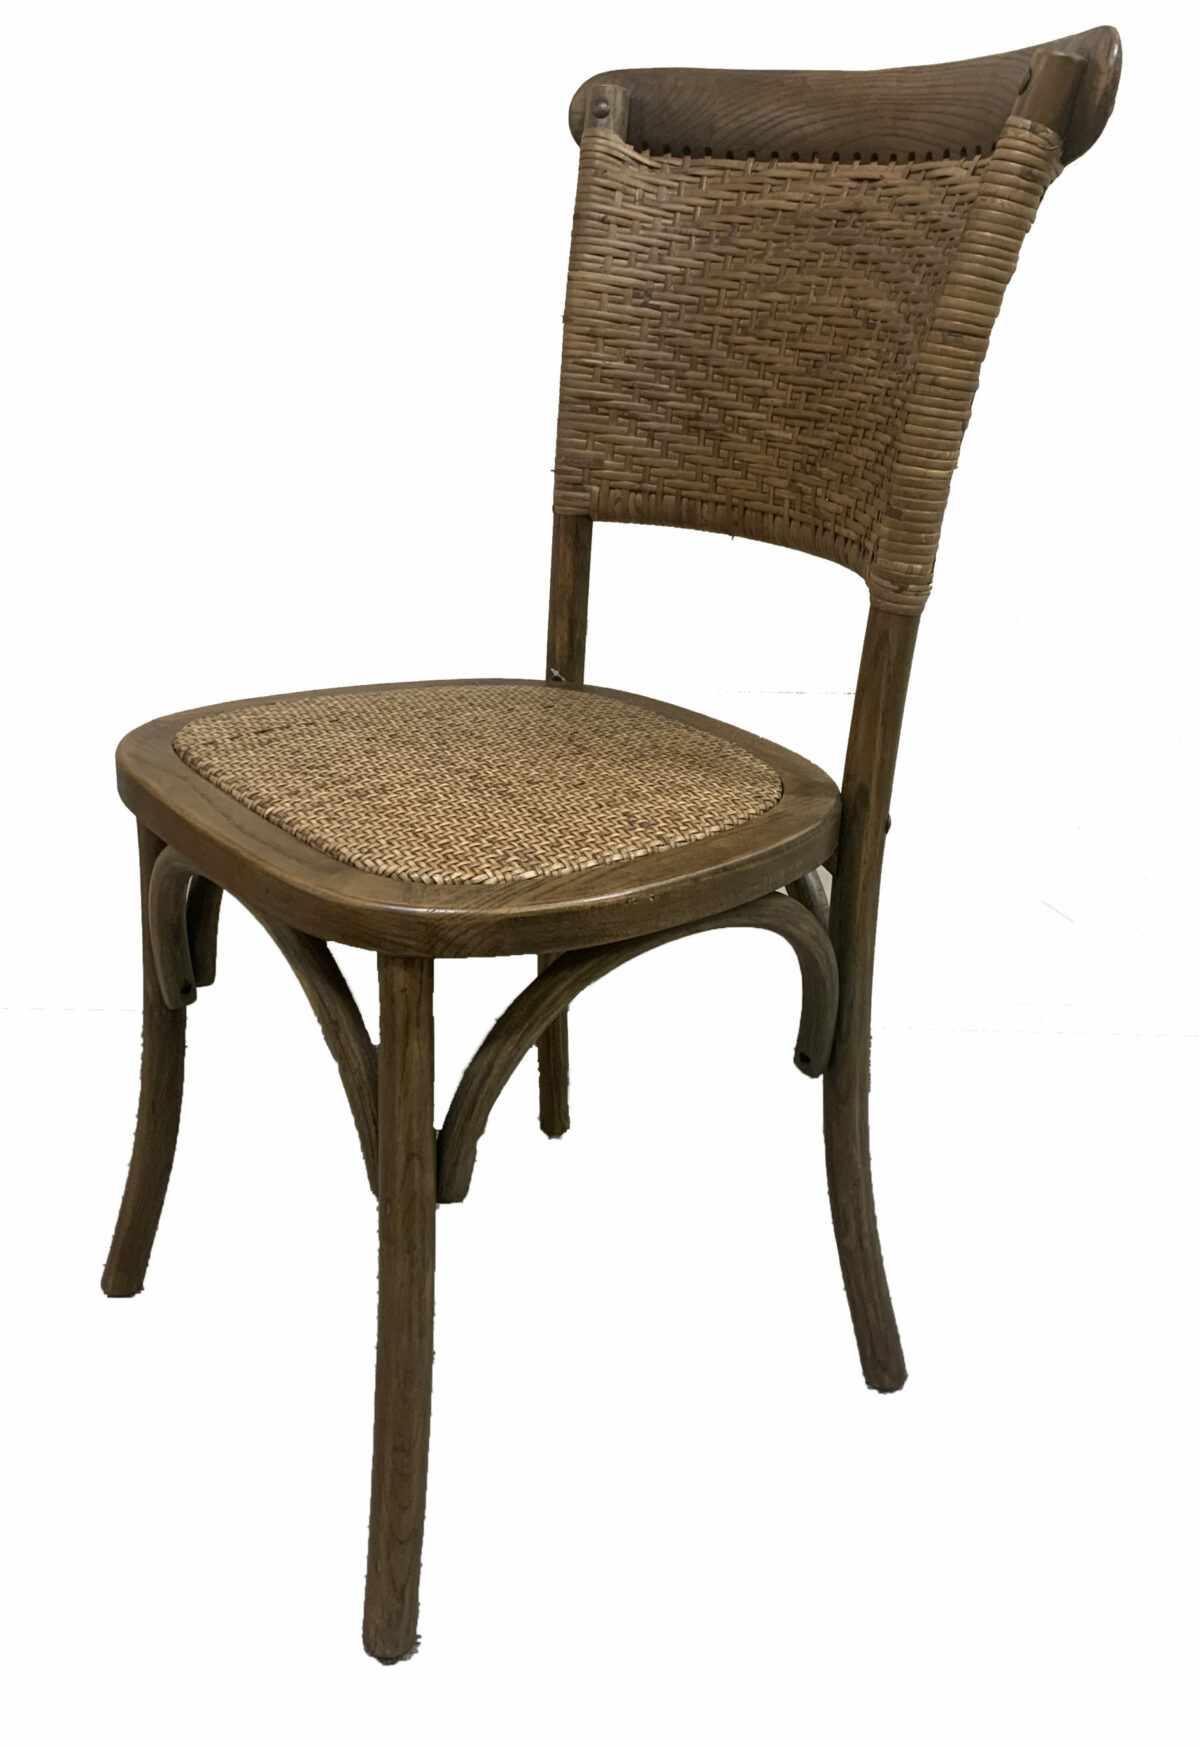 Rattan Weave Dining chair